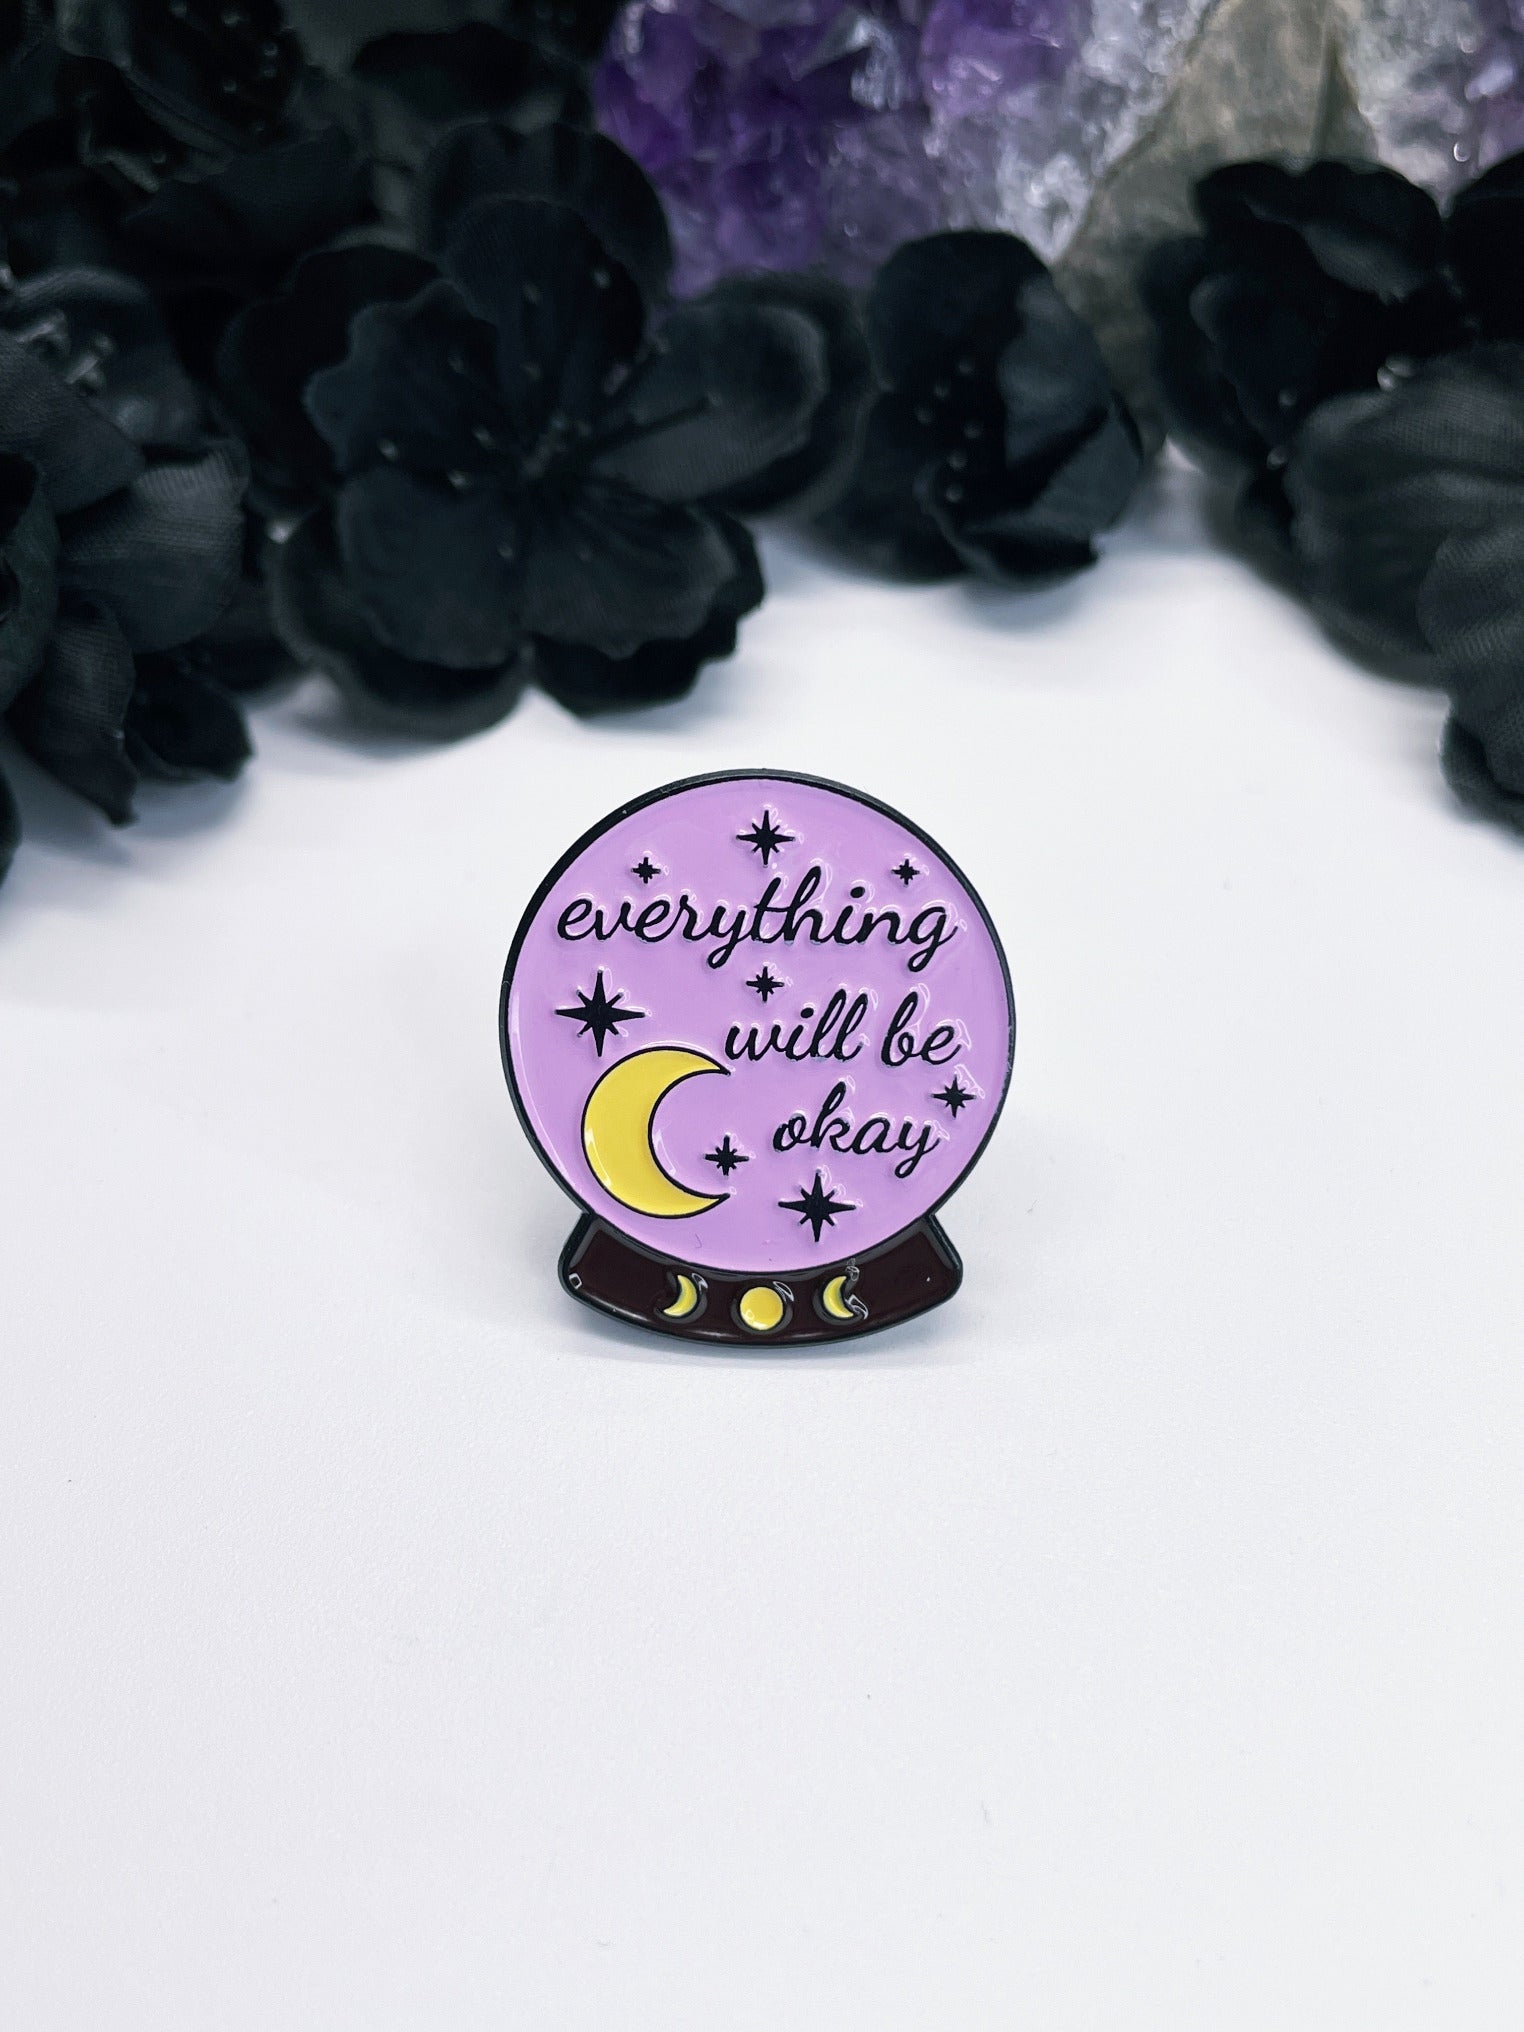 An image of an enamel pin featuring a crystal ball with the words "Everything Will Be Okay" written inside in black lettering. The pin is circular with a black border and has two metal fasteners on the back. 